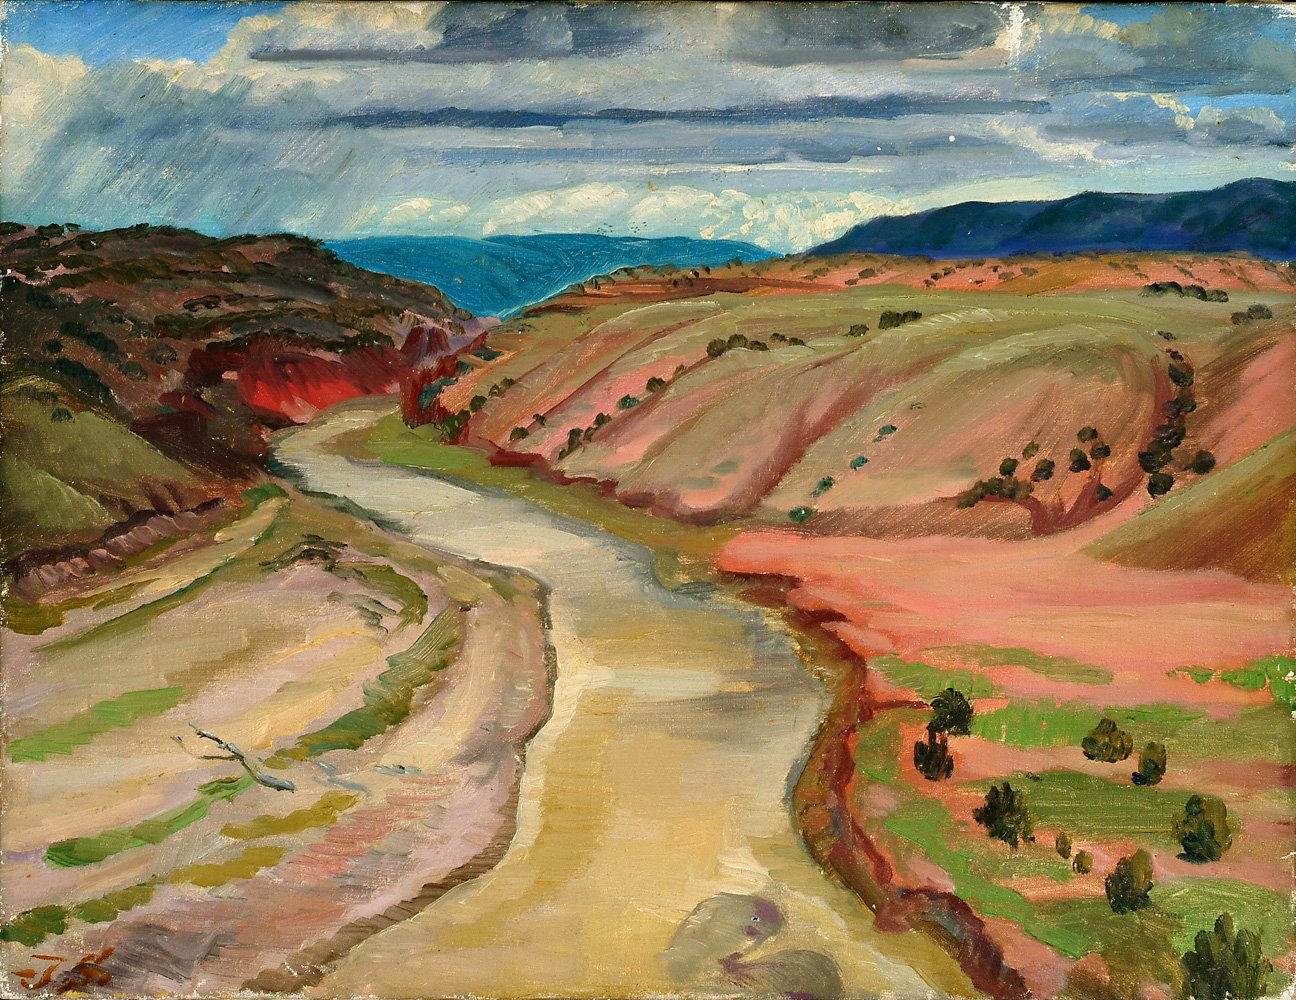 Painting of beige river running between two hills (pink on left, red on right) with blue hills in background